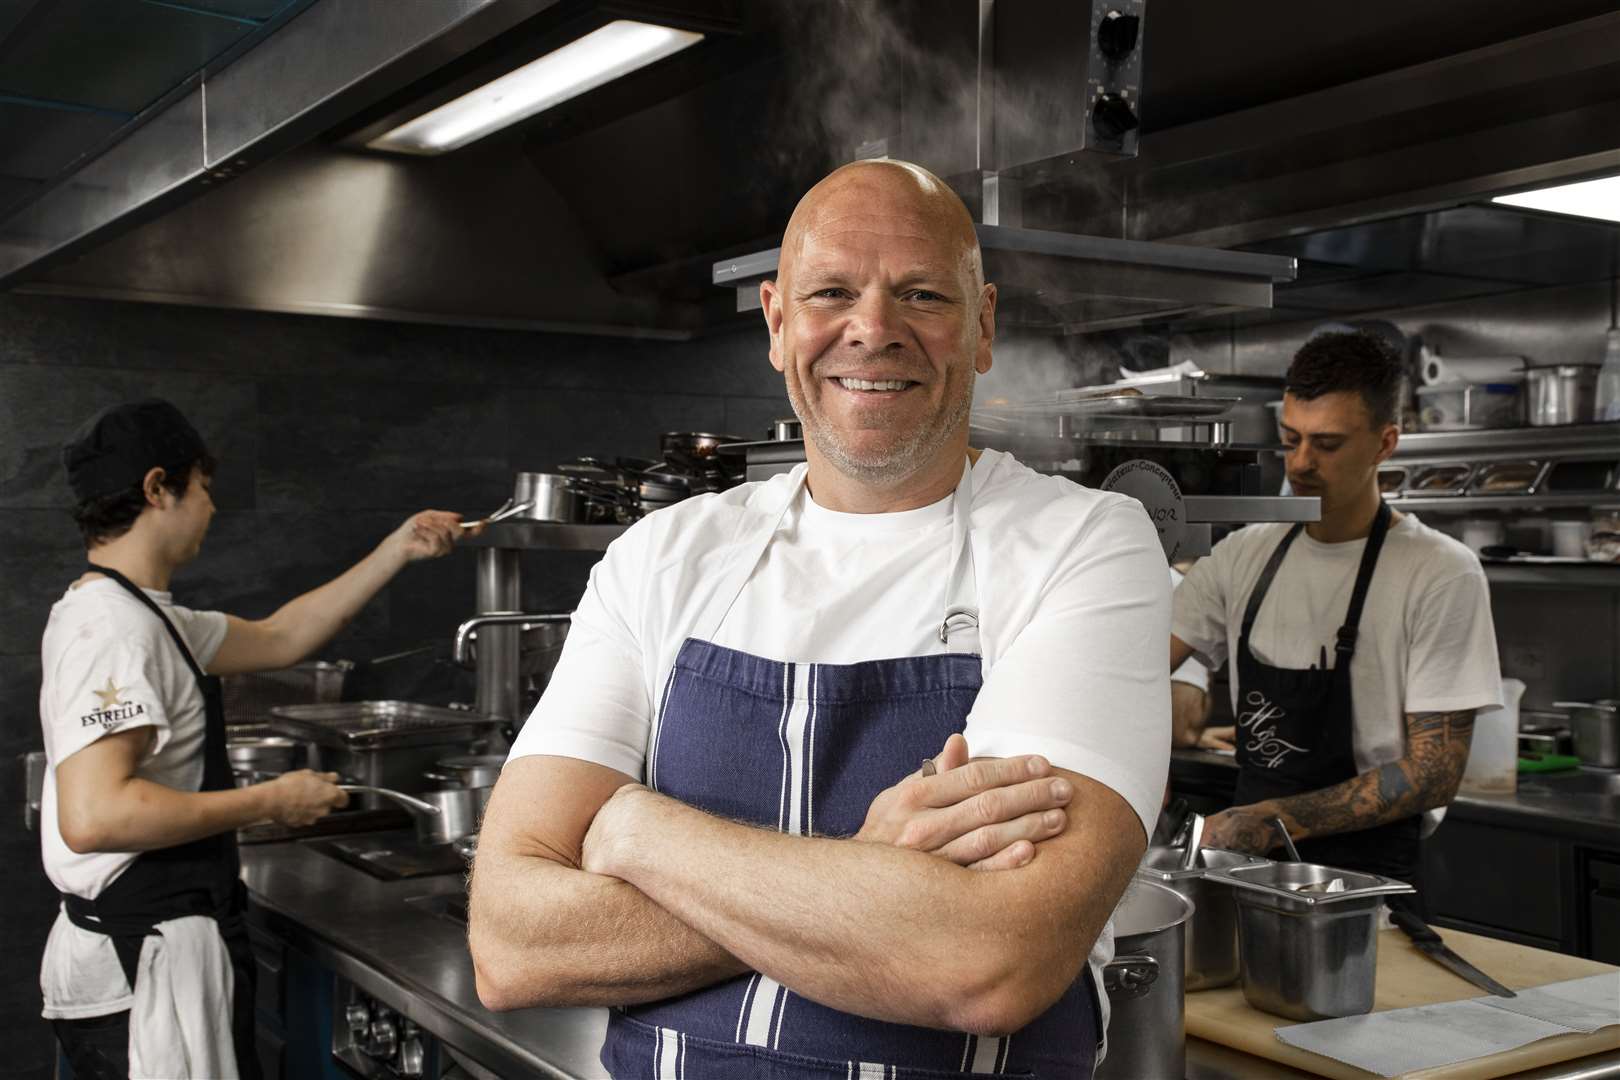 Chef Tom Kerridge is bringing his Pub in the Park festival to Tunbridge Wells. Picture: National Hospitality Day